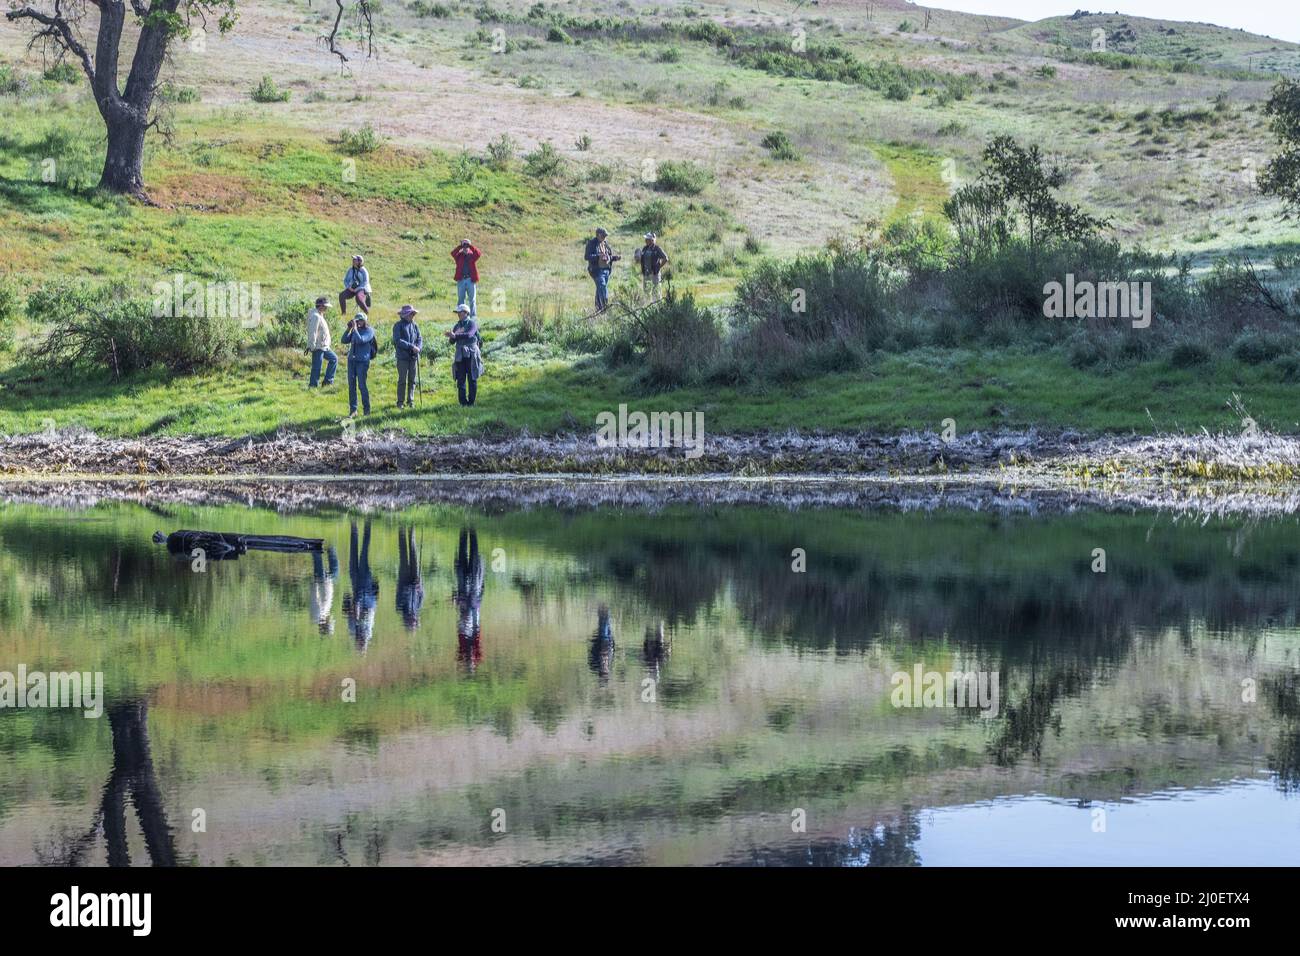 A group of hikers enjoying the outdoors and looking at the pretty reflections in the water in the Northern California countryside. Stock Photo